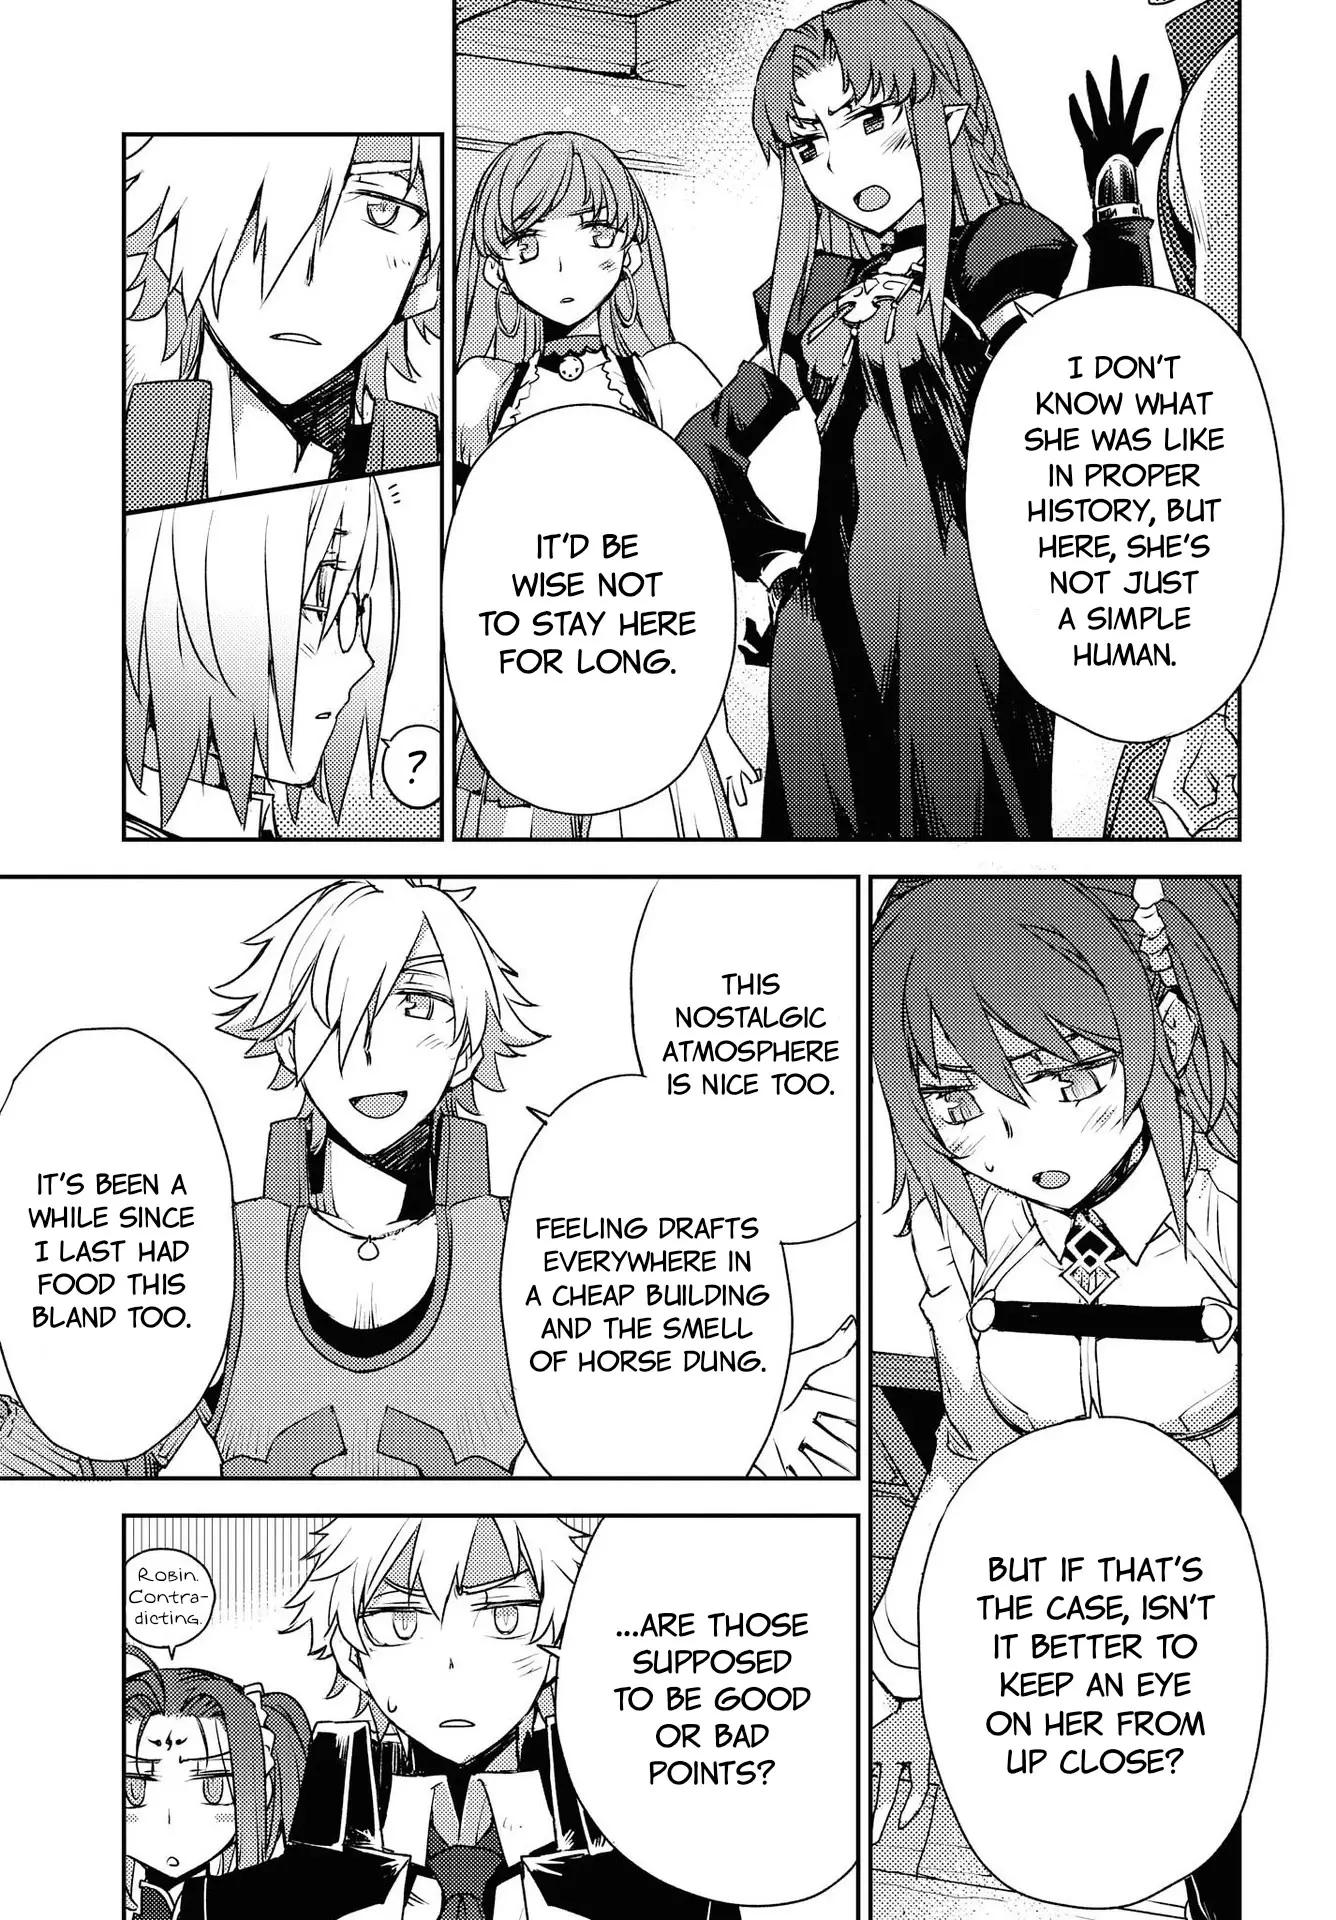 Fate/grand Order: Epic Of Remnant - Subspecies Singularity Iv: Taboo Advent Salem: Salem Of Heresy - 4 page 9